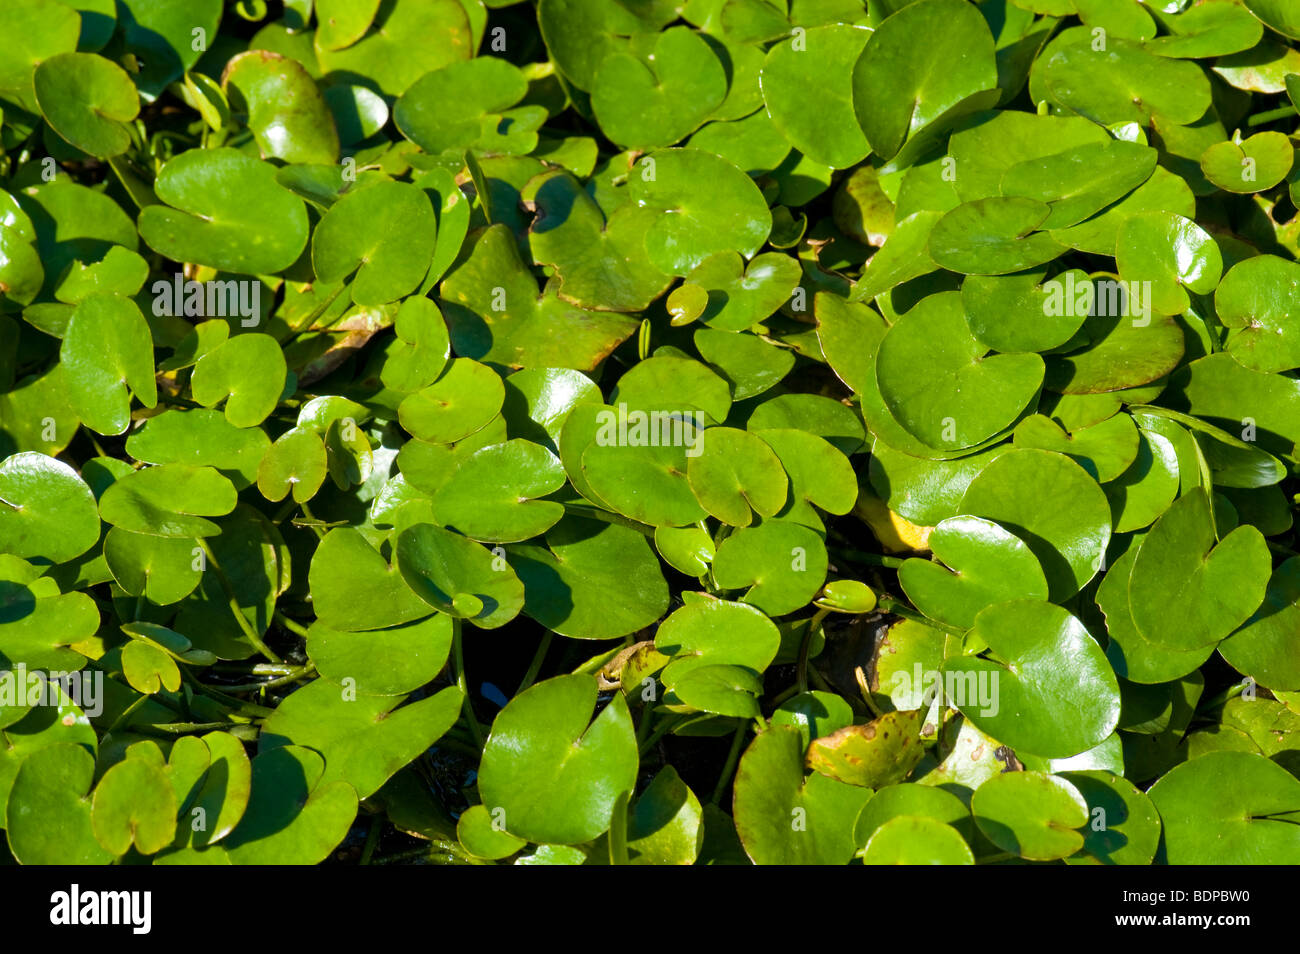 Nymphoides Peltata Yellow floating heart water waterplant plant green surface swim swimming cover covering pond lake garden seek Stock Photo